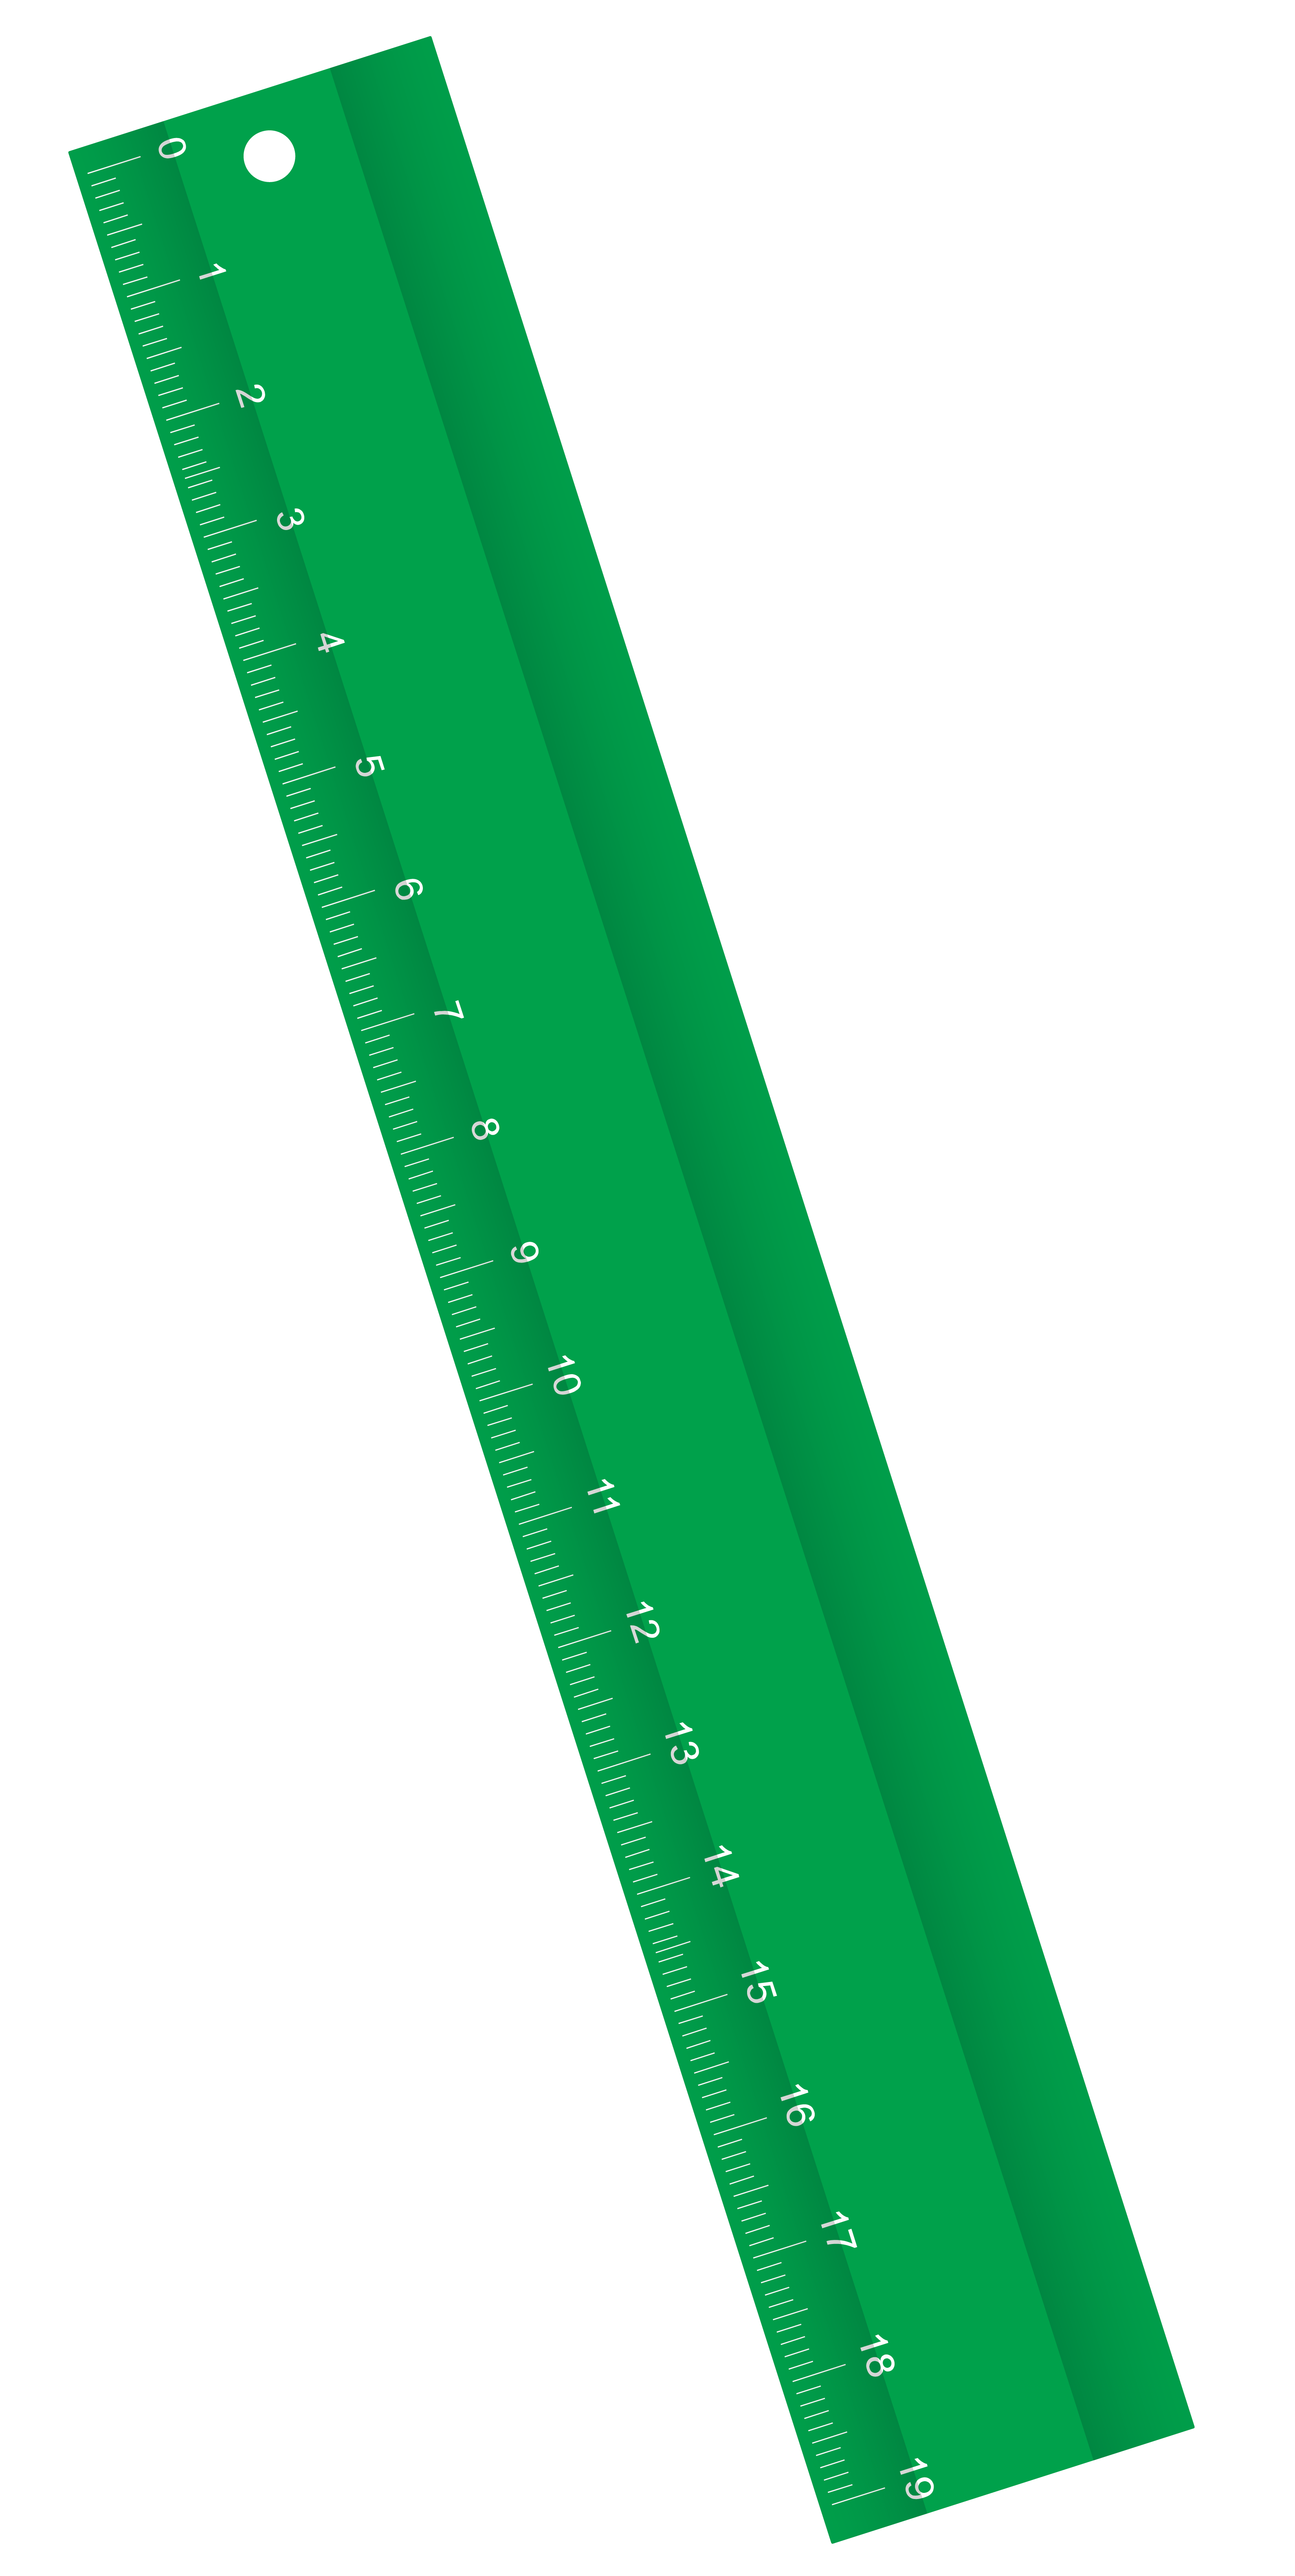 free clipart images ruler - photo #39